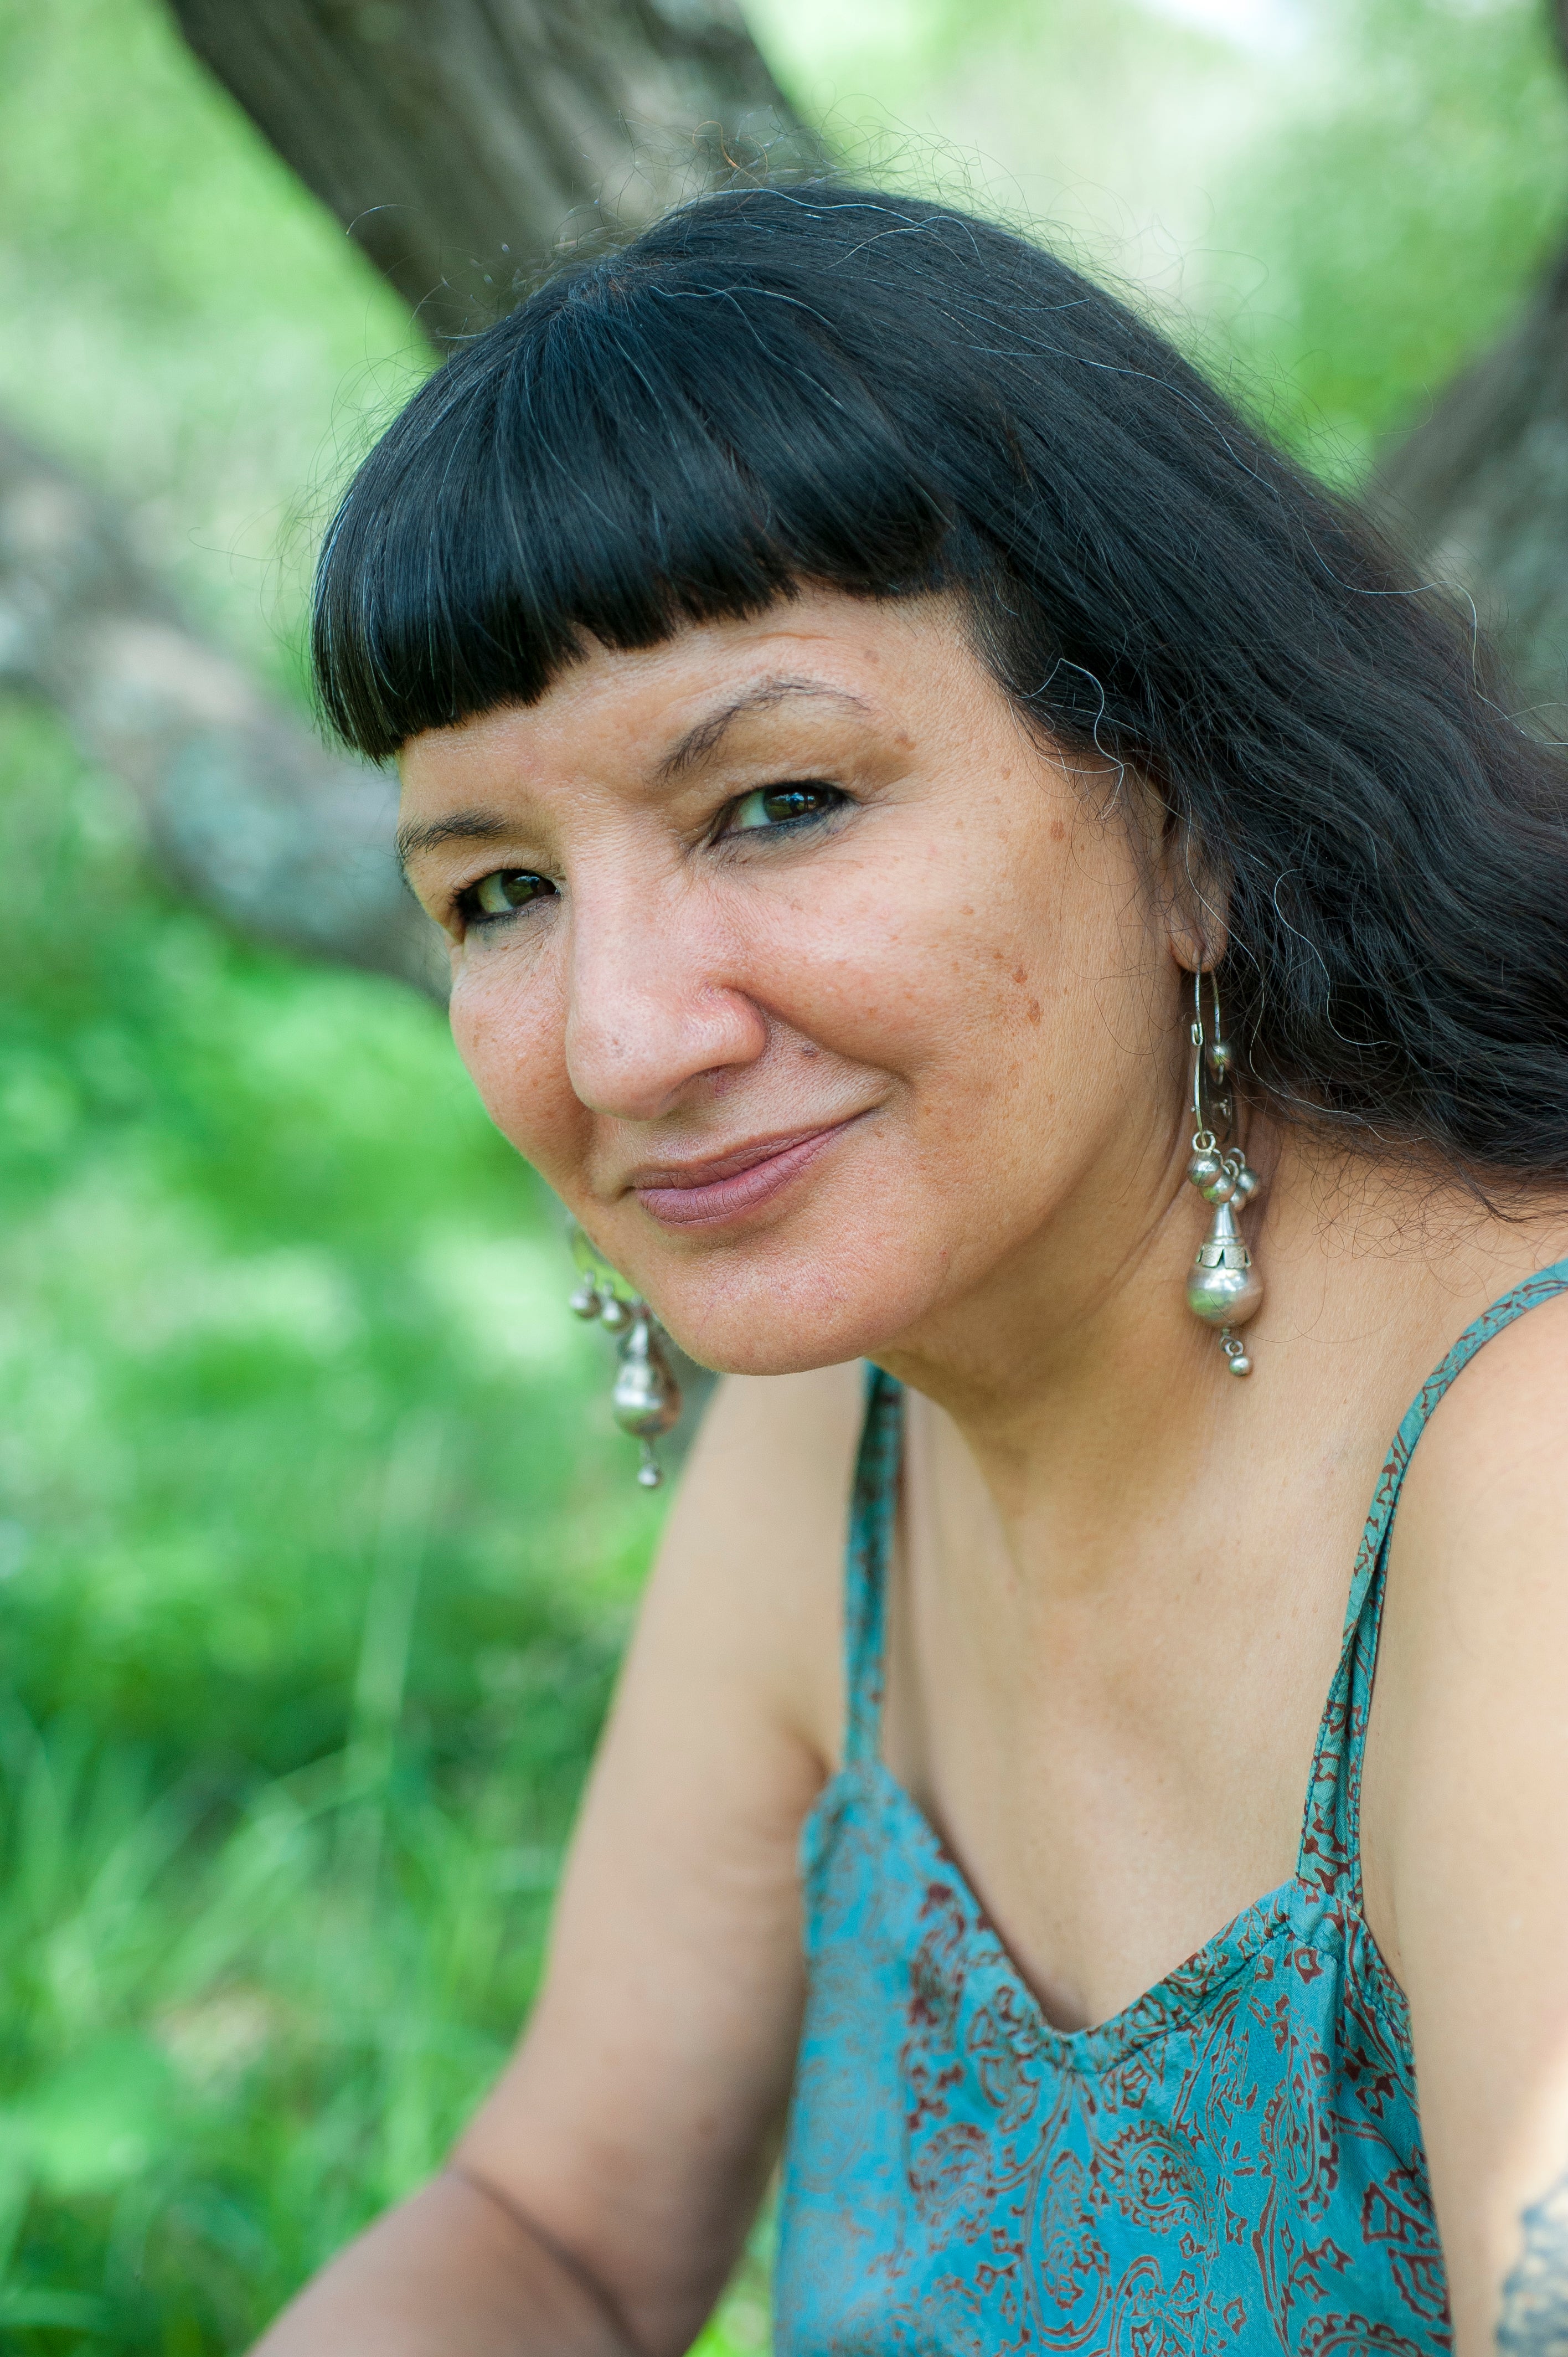 Sandra Cisneros photographed at the town she now calls home in San Miguel de Allende, Guanajuato, Mexico.